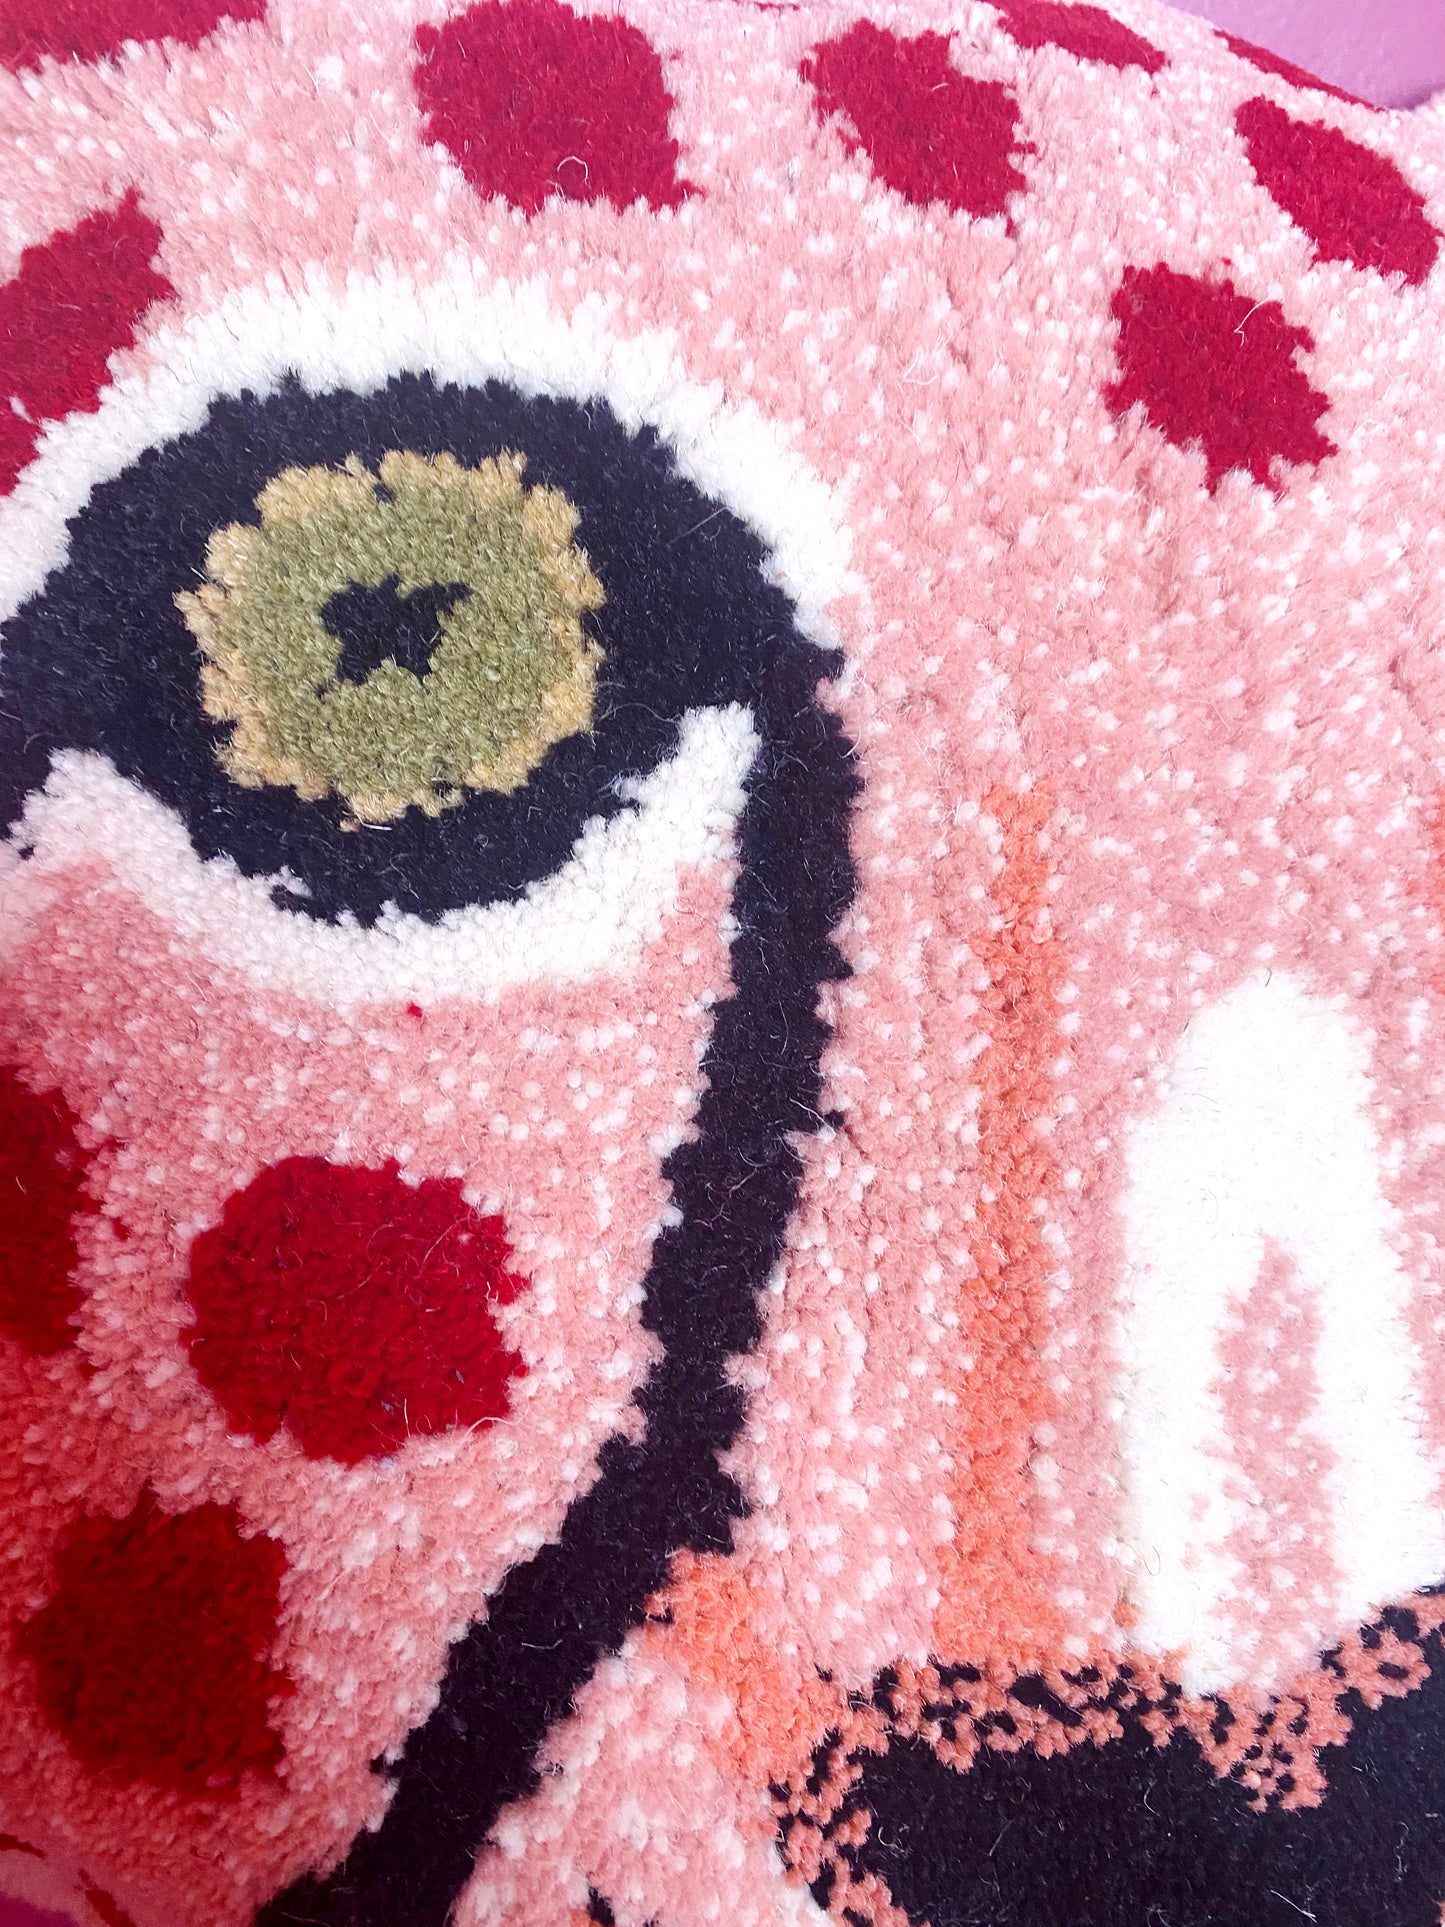 'Strawberry' Large Pink & Red Leopard Face Cushion